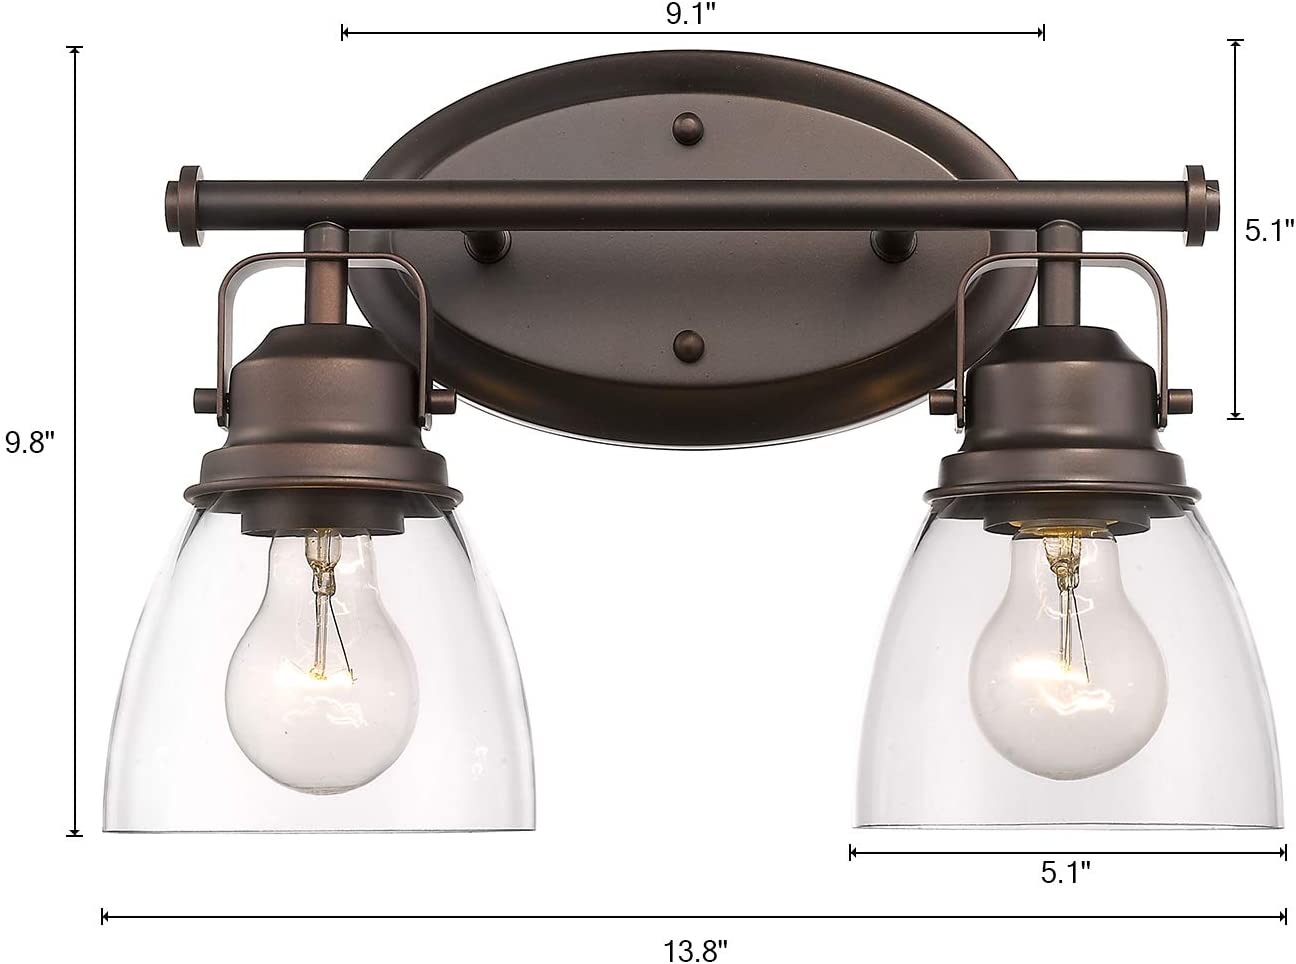 2-Light antique wall lights industrial glass wall sconce with Oil Rubbed Finish